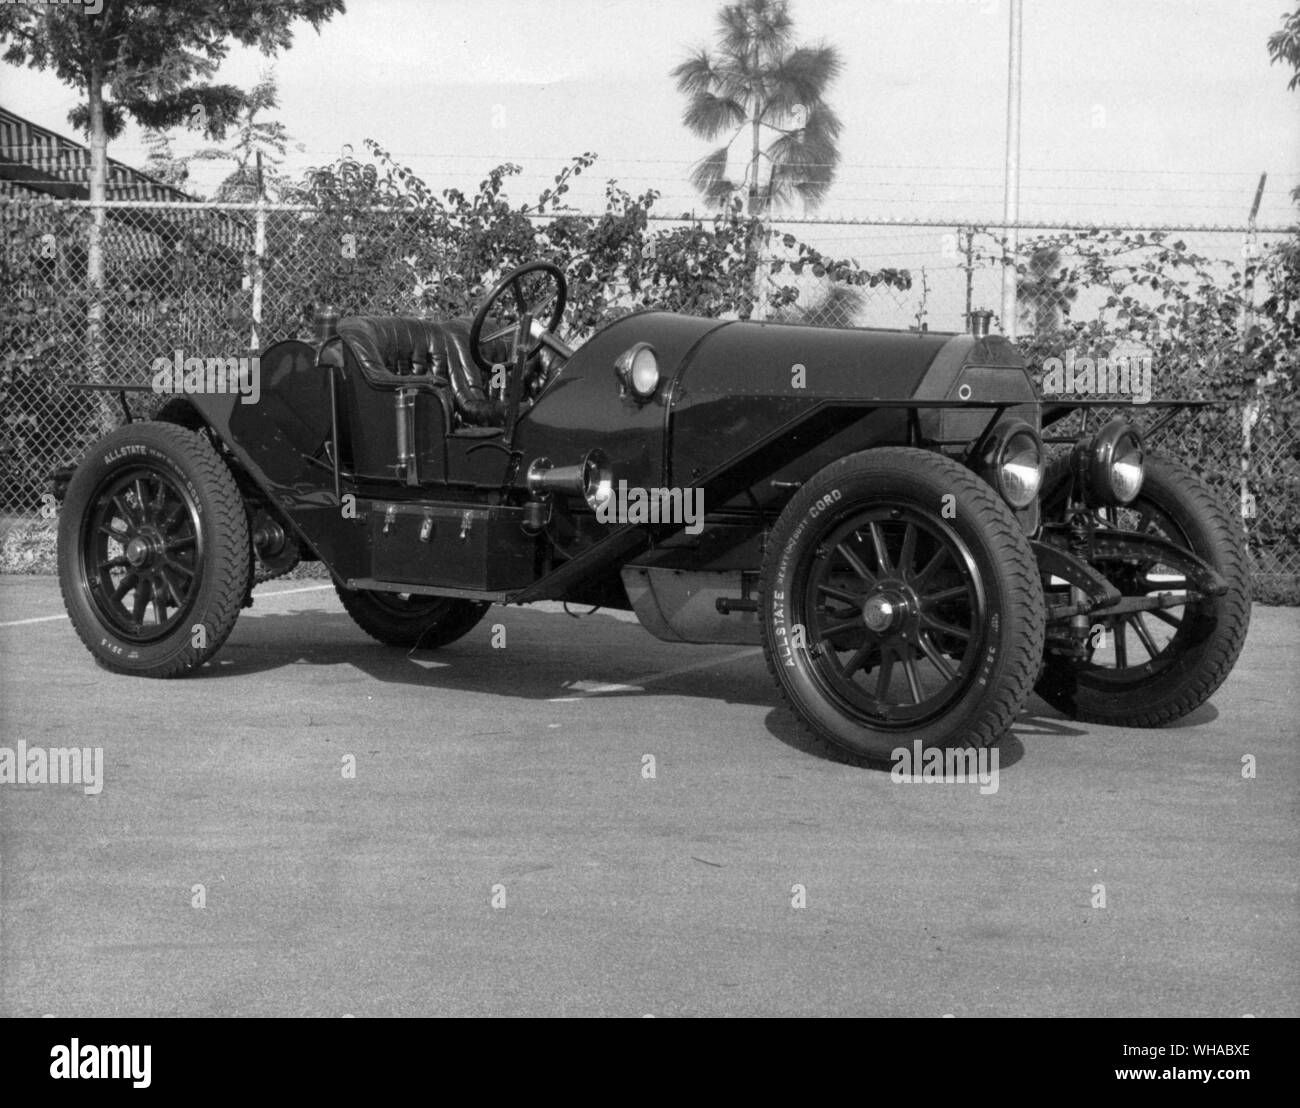 Simplex 1914. Roadster 4 cylinder Last of chain drive passenger cars made in America. Formerly owned by Barron Collier of New York Stock Photo